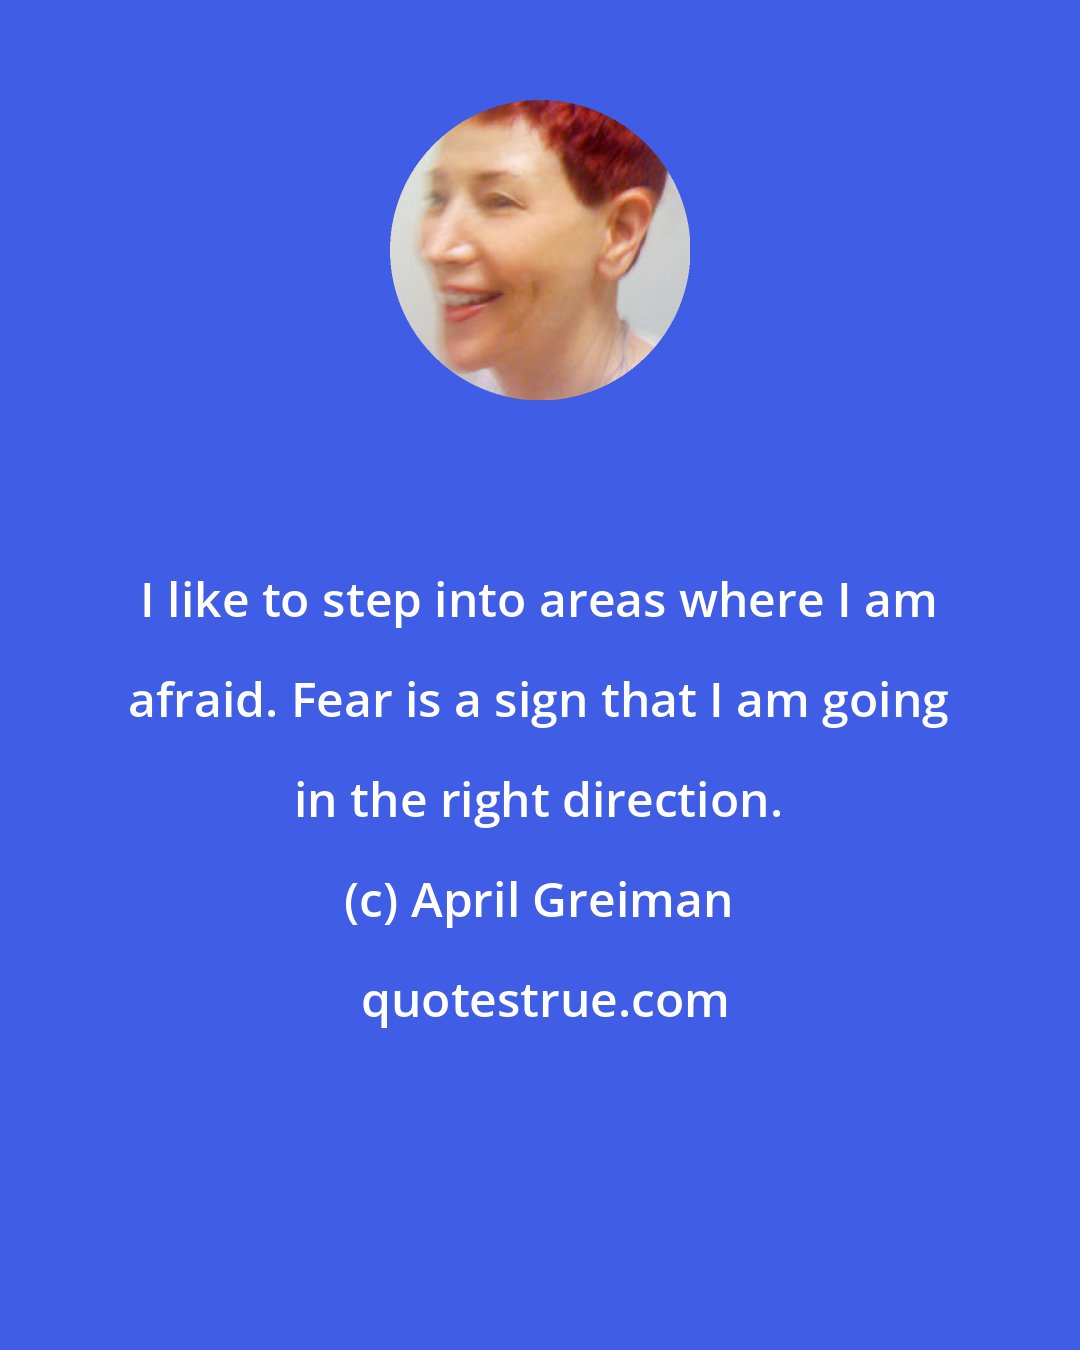 April Greiman: I like to step into areas where I am afraid. Fear is a sign that I am going in the right direction.